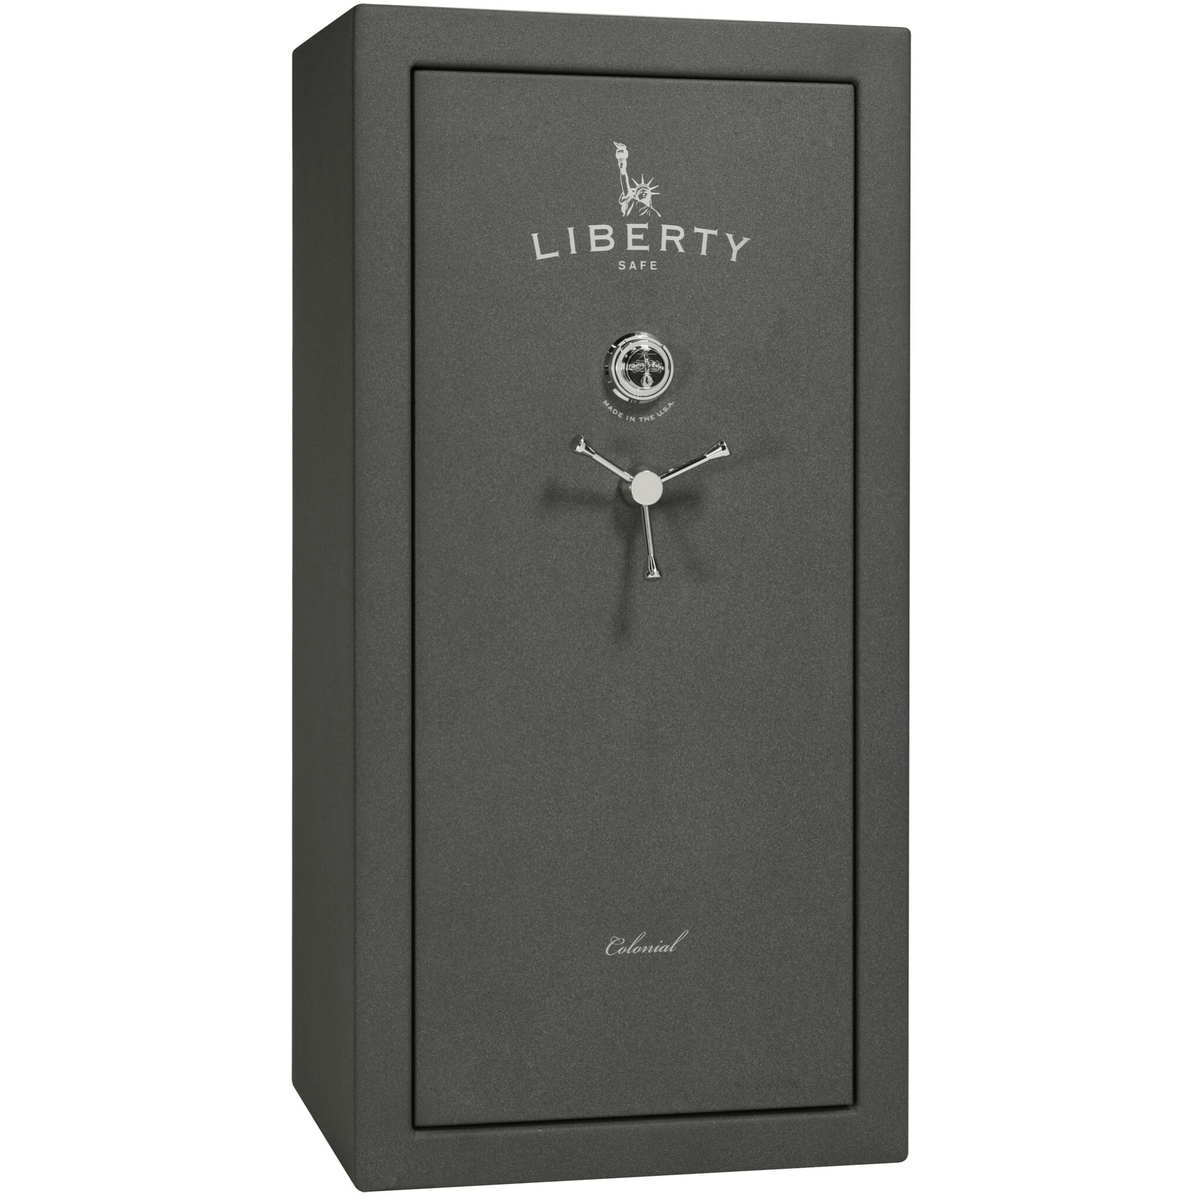 Liberty Colonial 23 Safe in Textured Granite with Chrome Mechanical Lock.